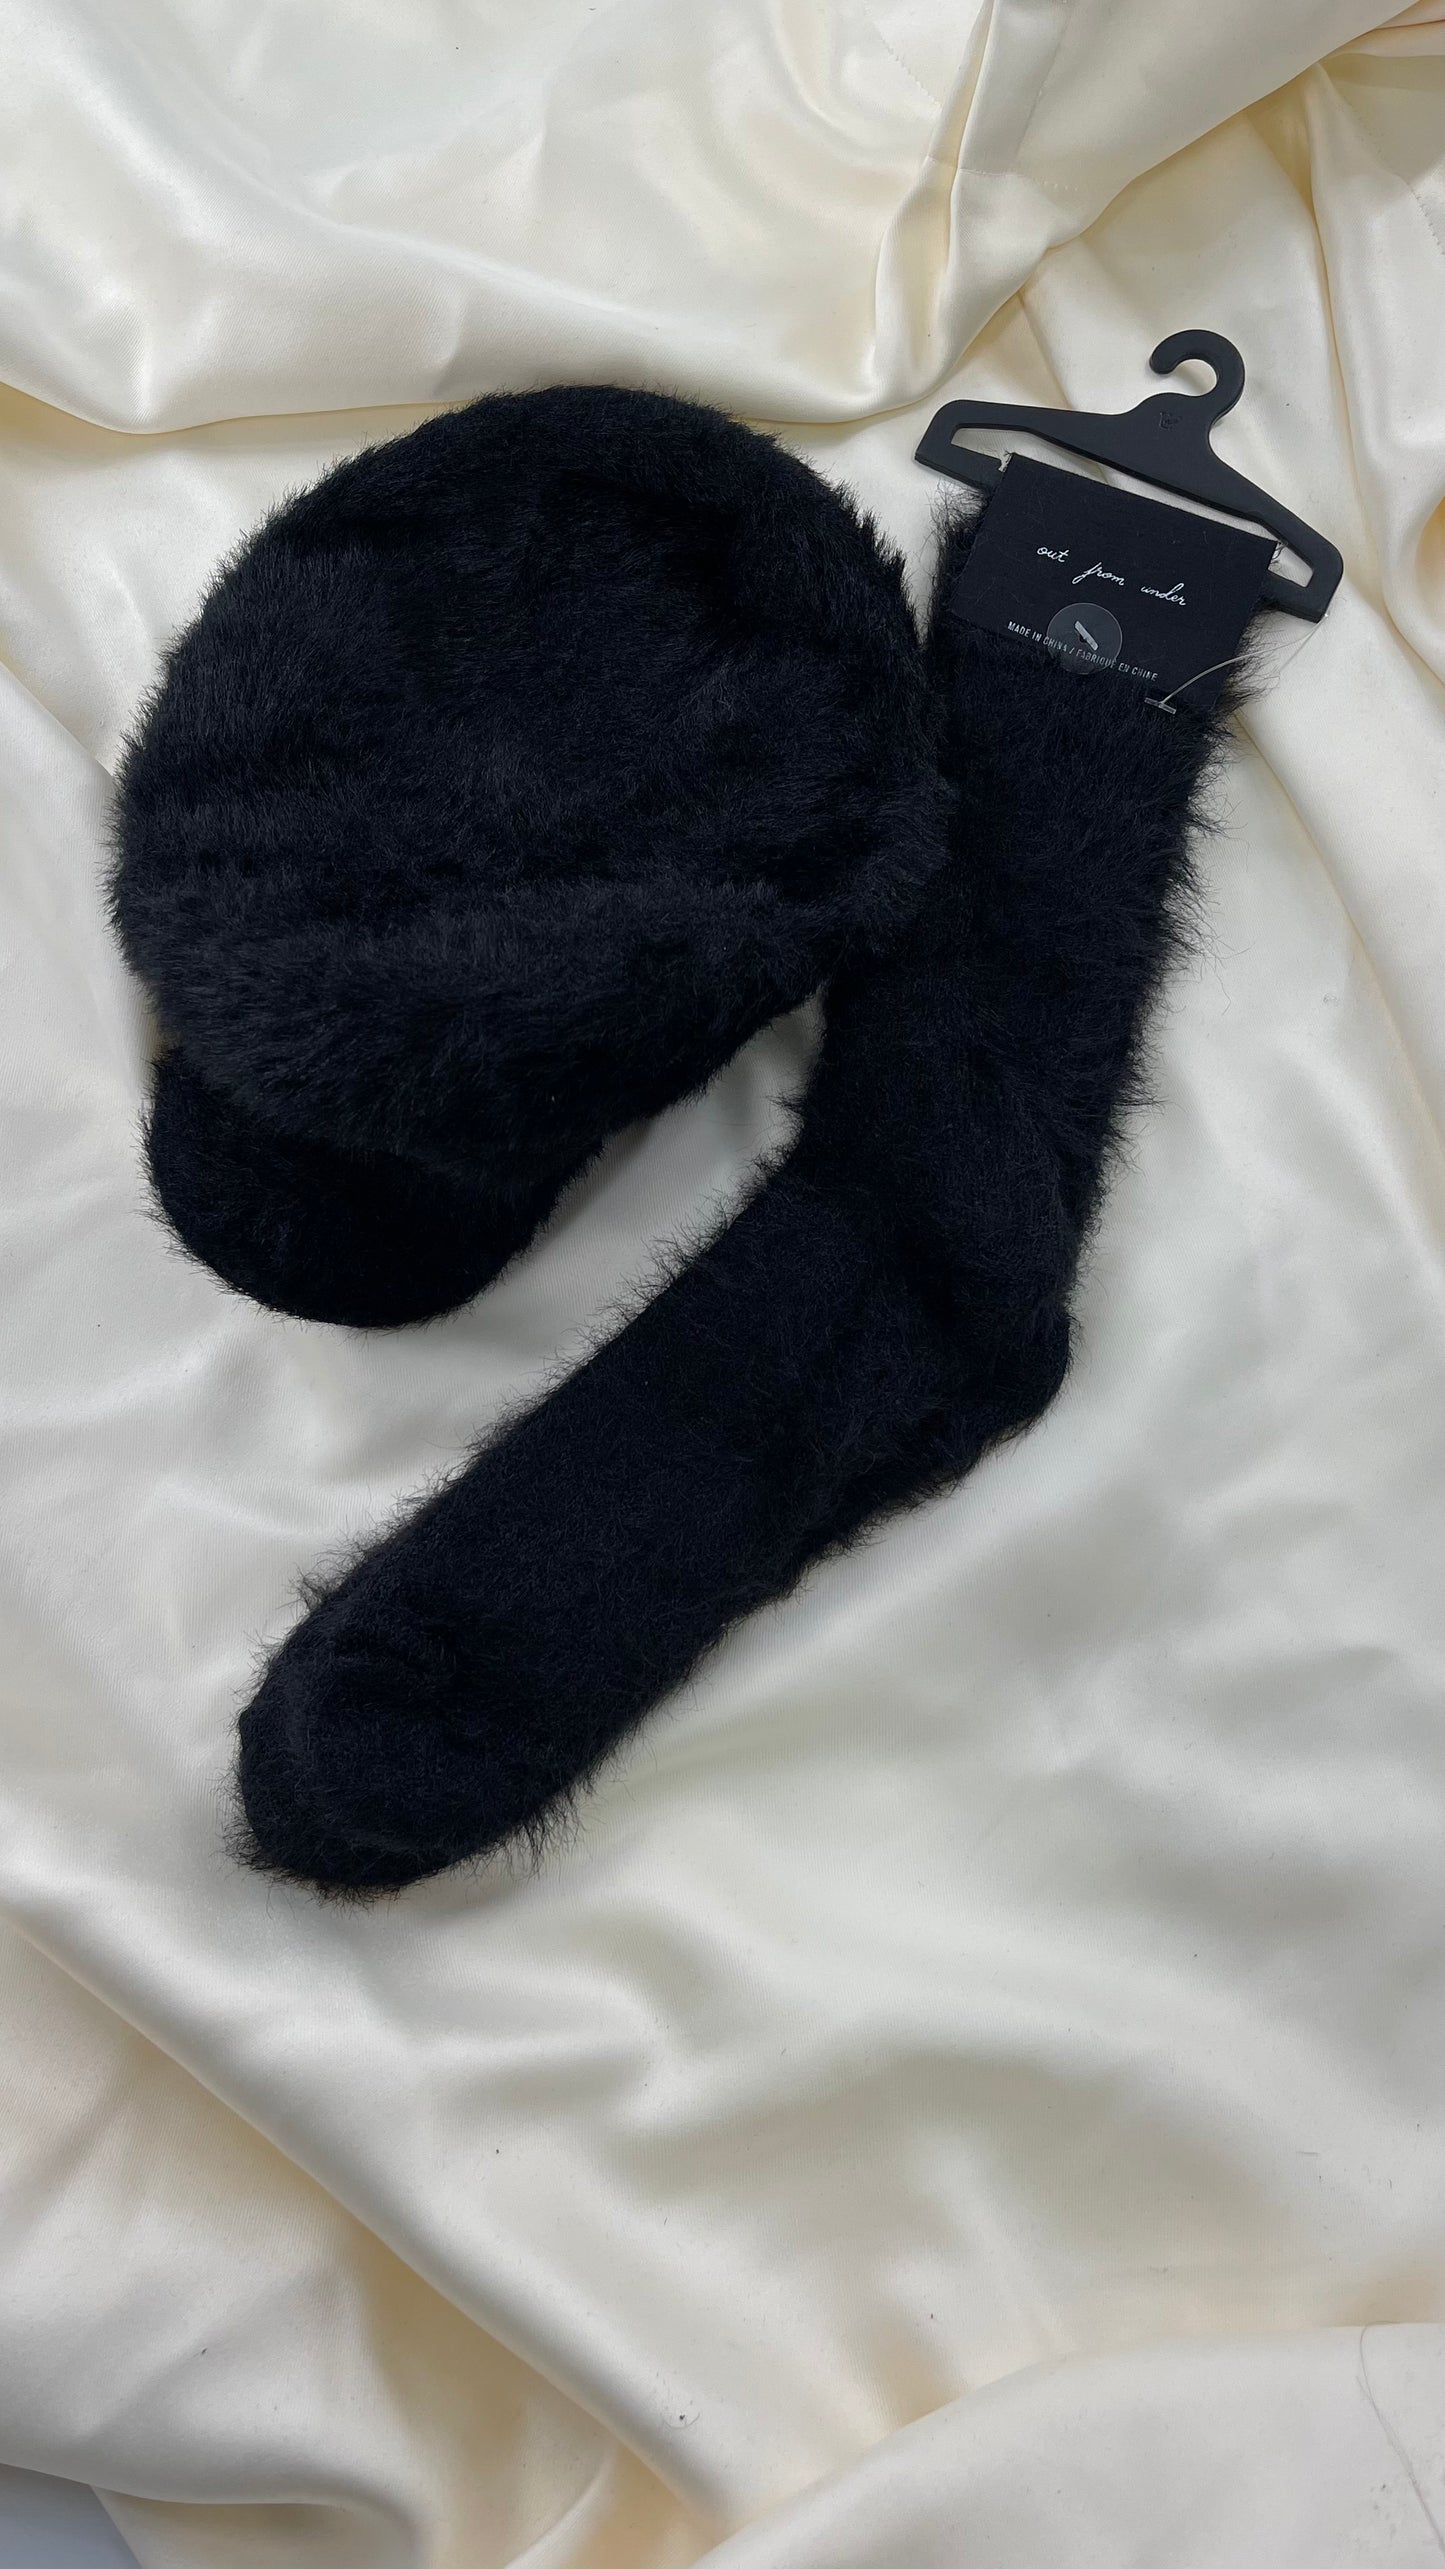 Urban Outfitters Black Fuzzy Newsboy Cap and Knee High Sock Set